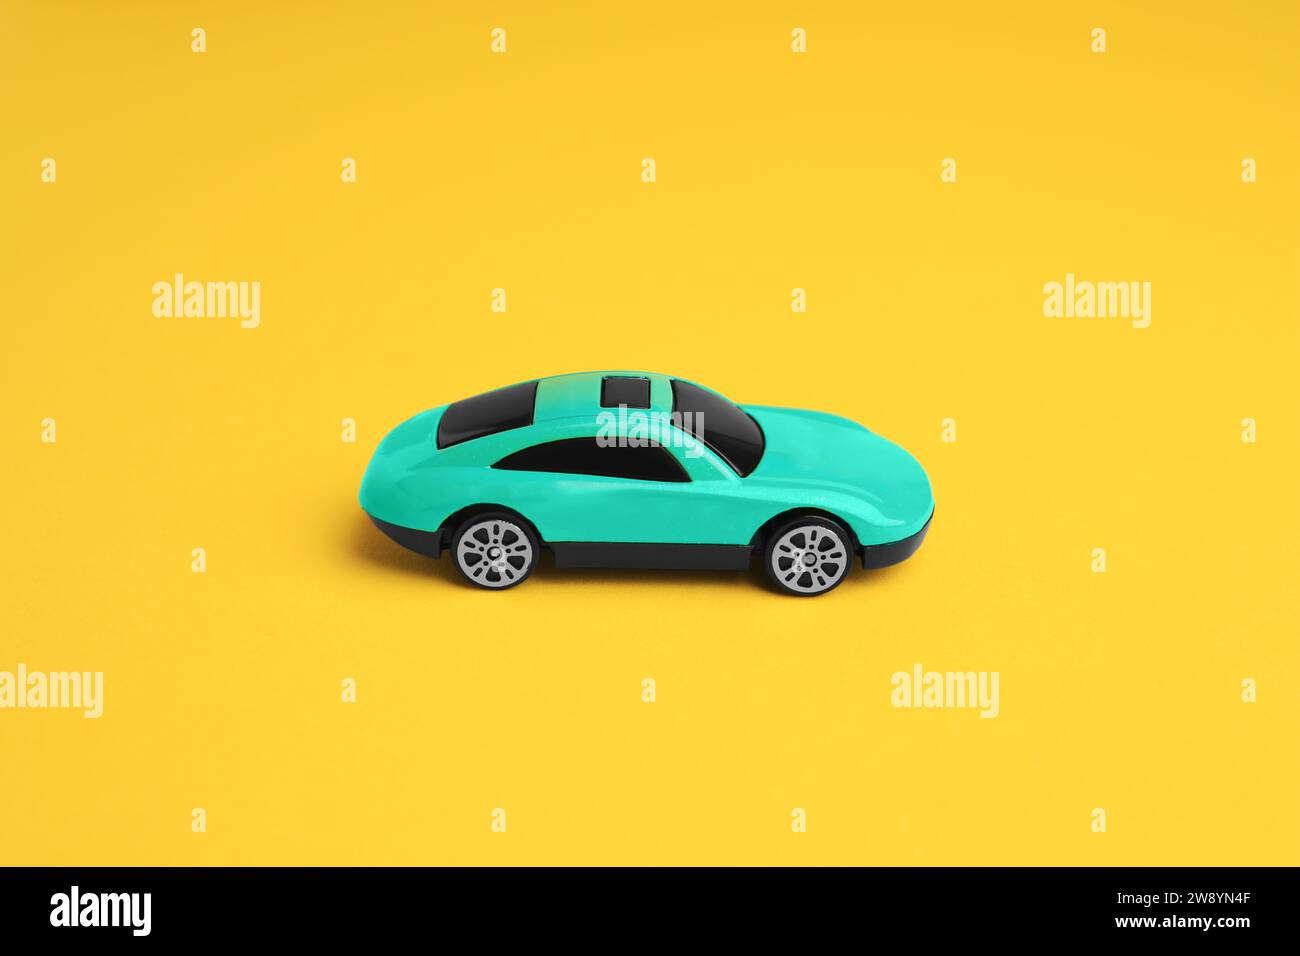 One turquoise car on yellow background. Children`s toy Stock Photo